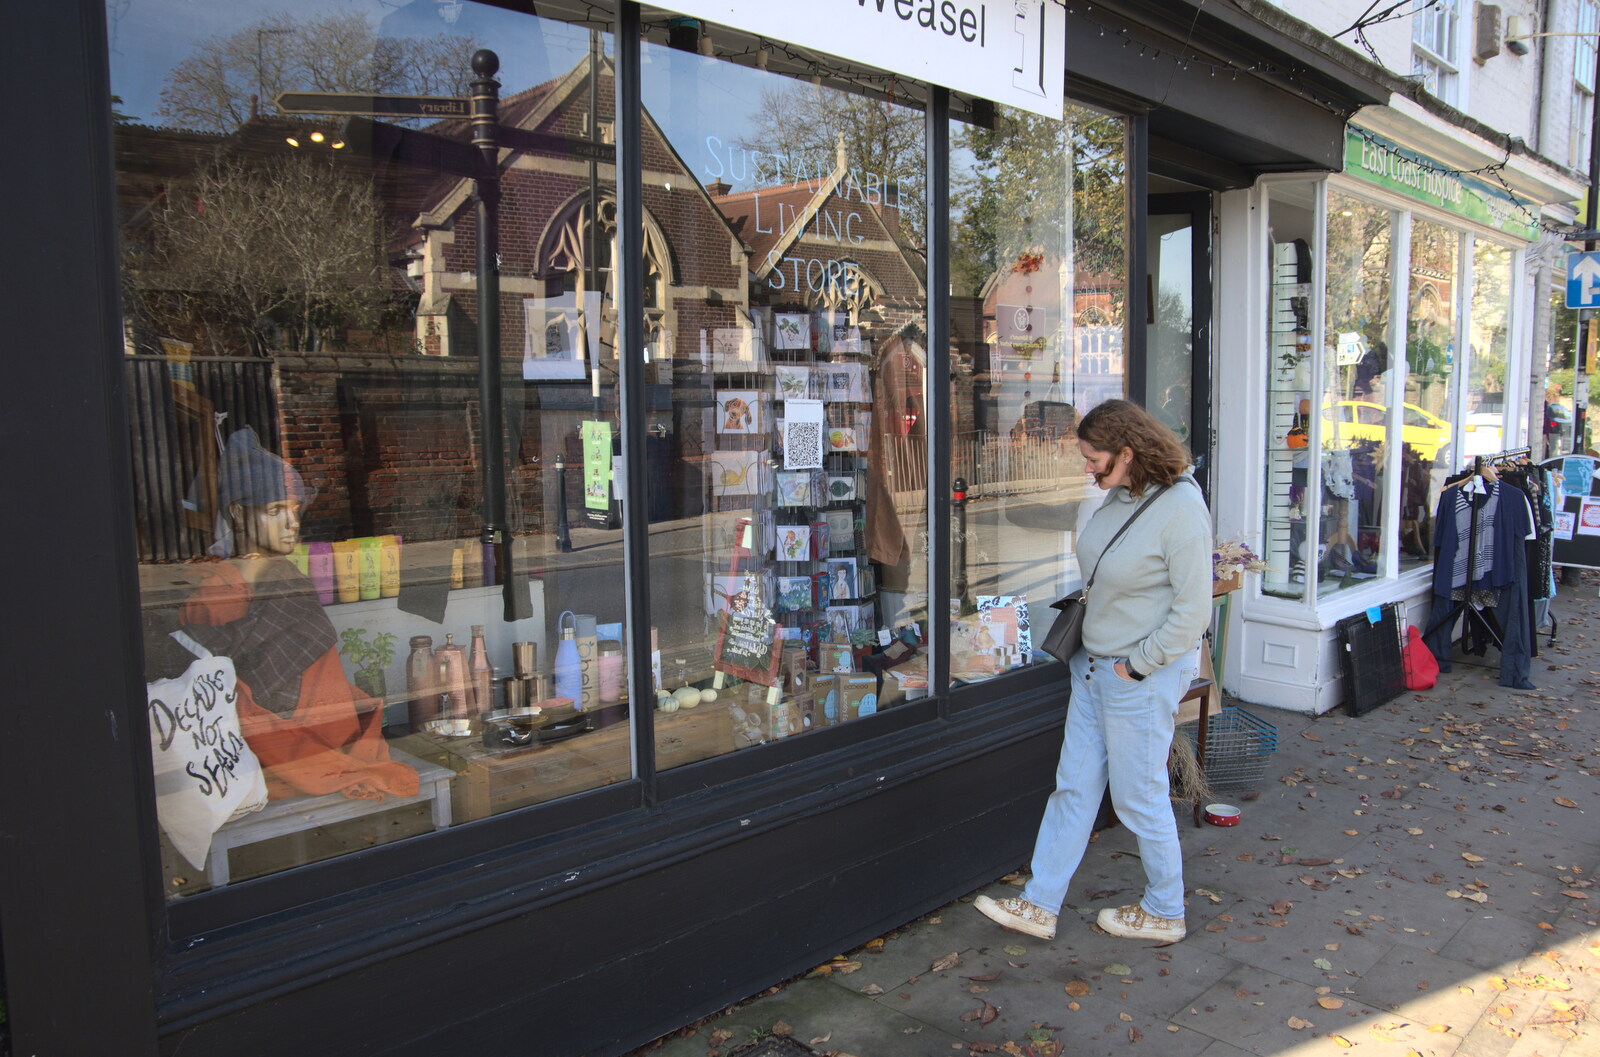 A Postcard from Bungay, Suffolk - 2nd November 2022: Isobel looks in a shop window